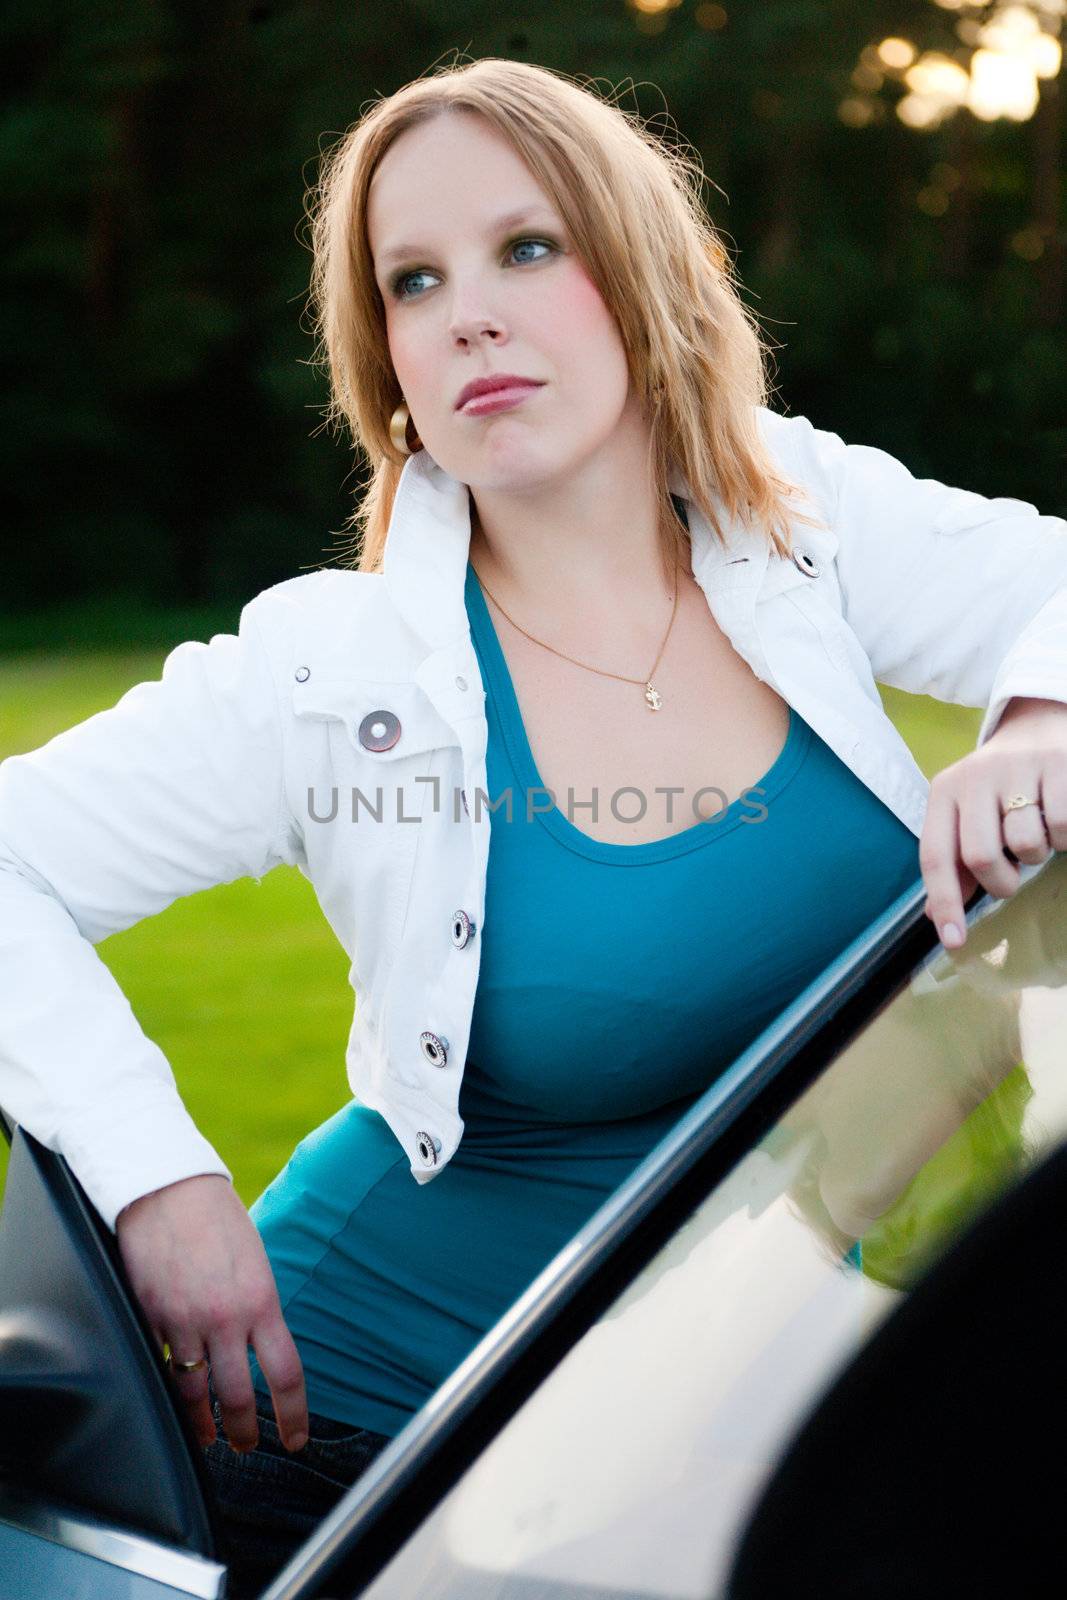 Being the model in front of a car